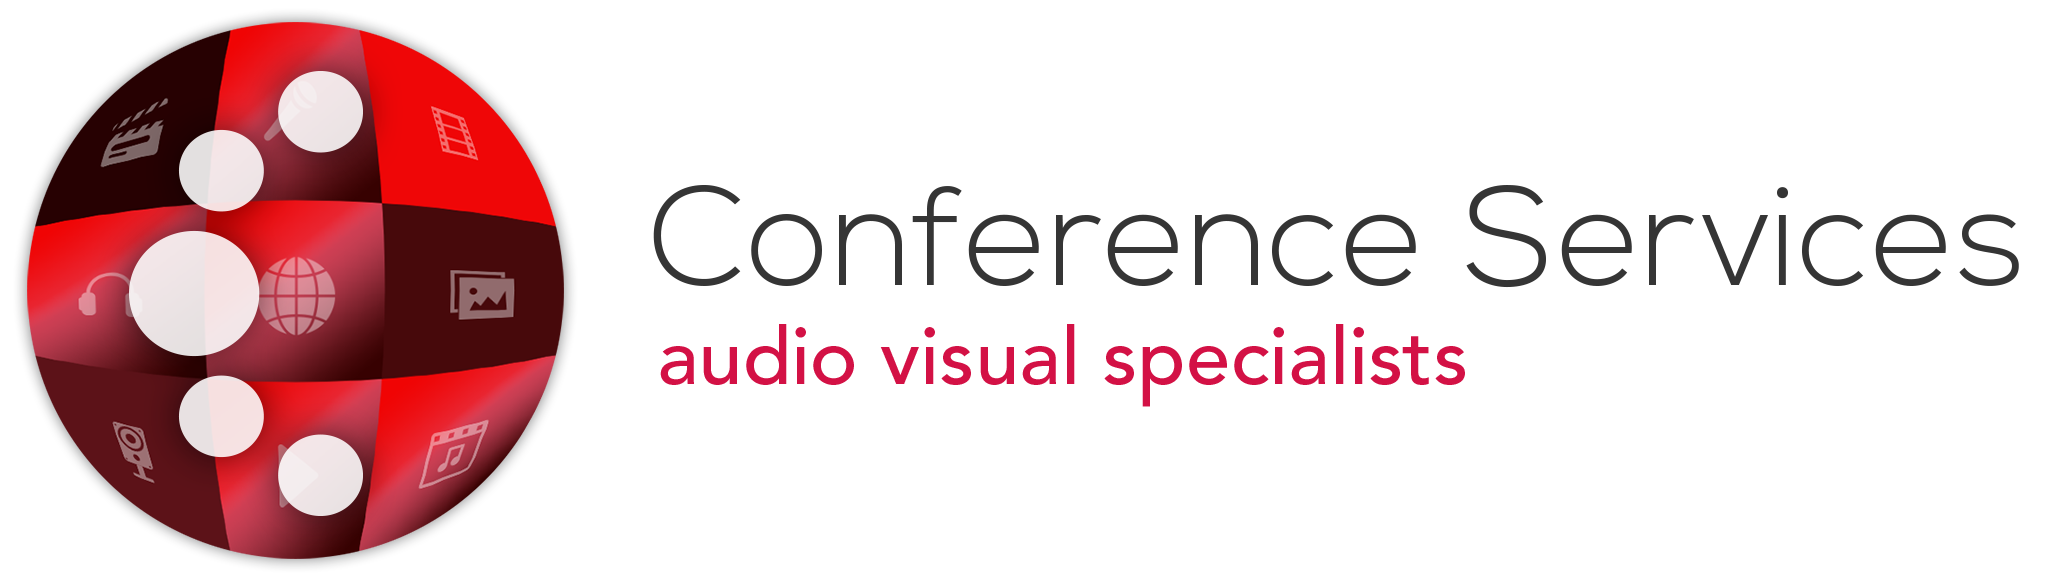 Conference Services logo